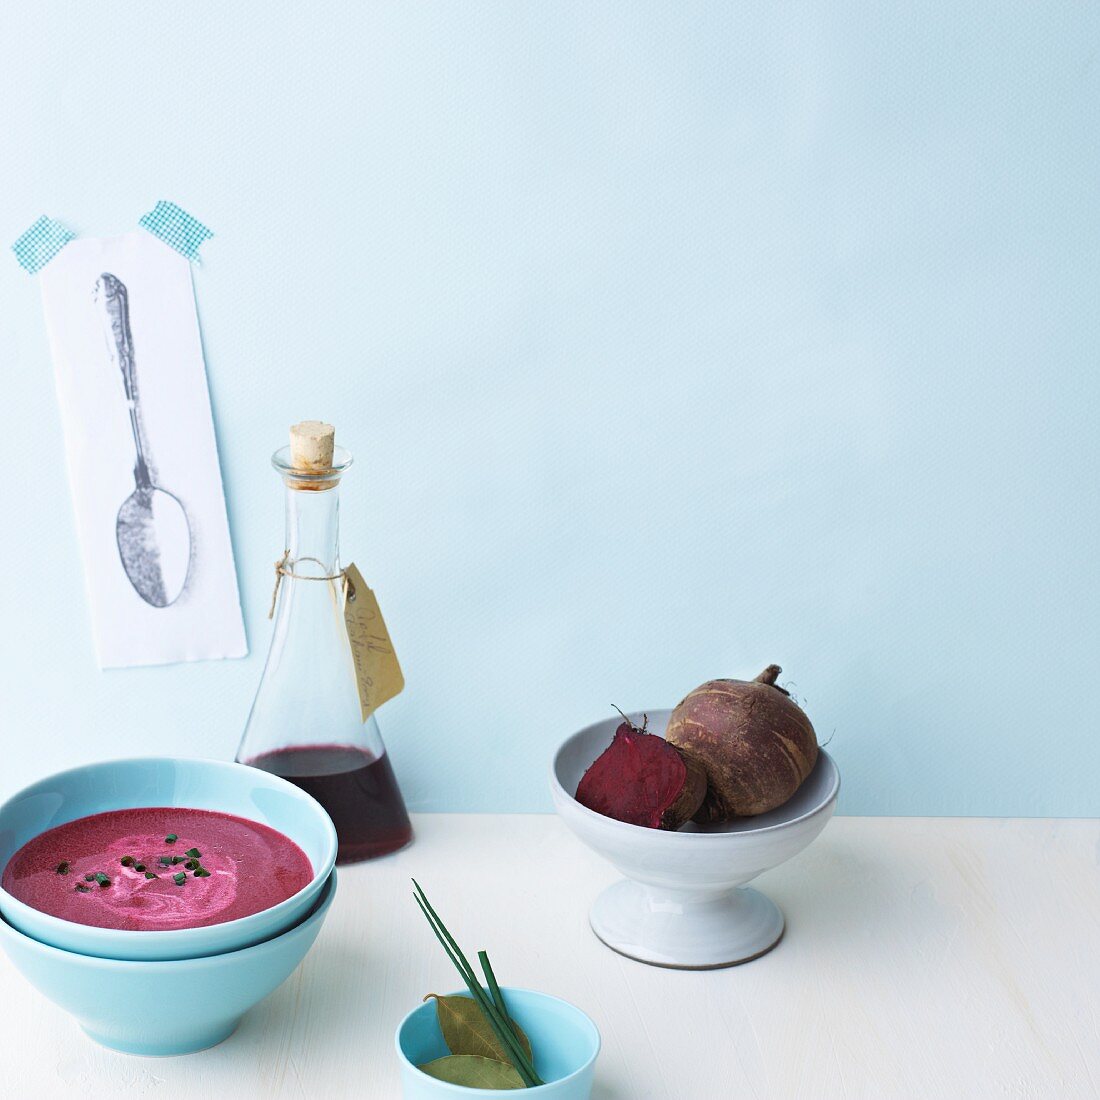 Beetroot soup with chives and bay leaves